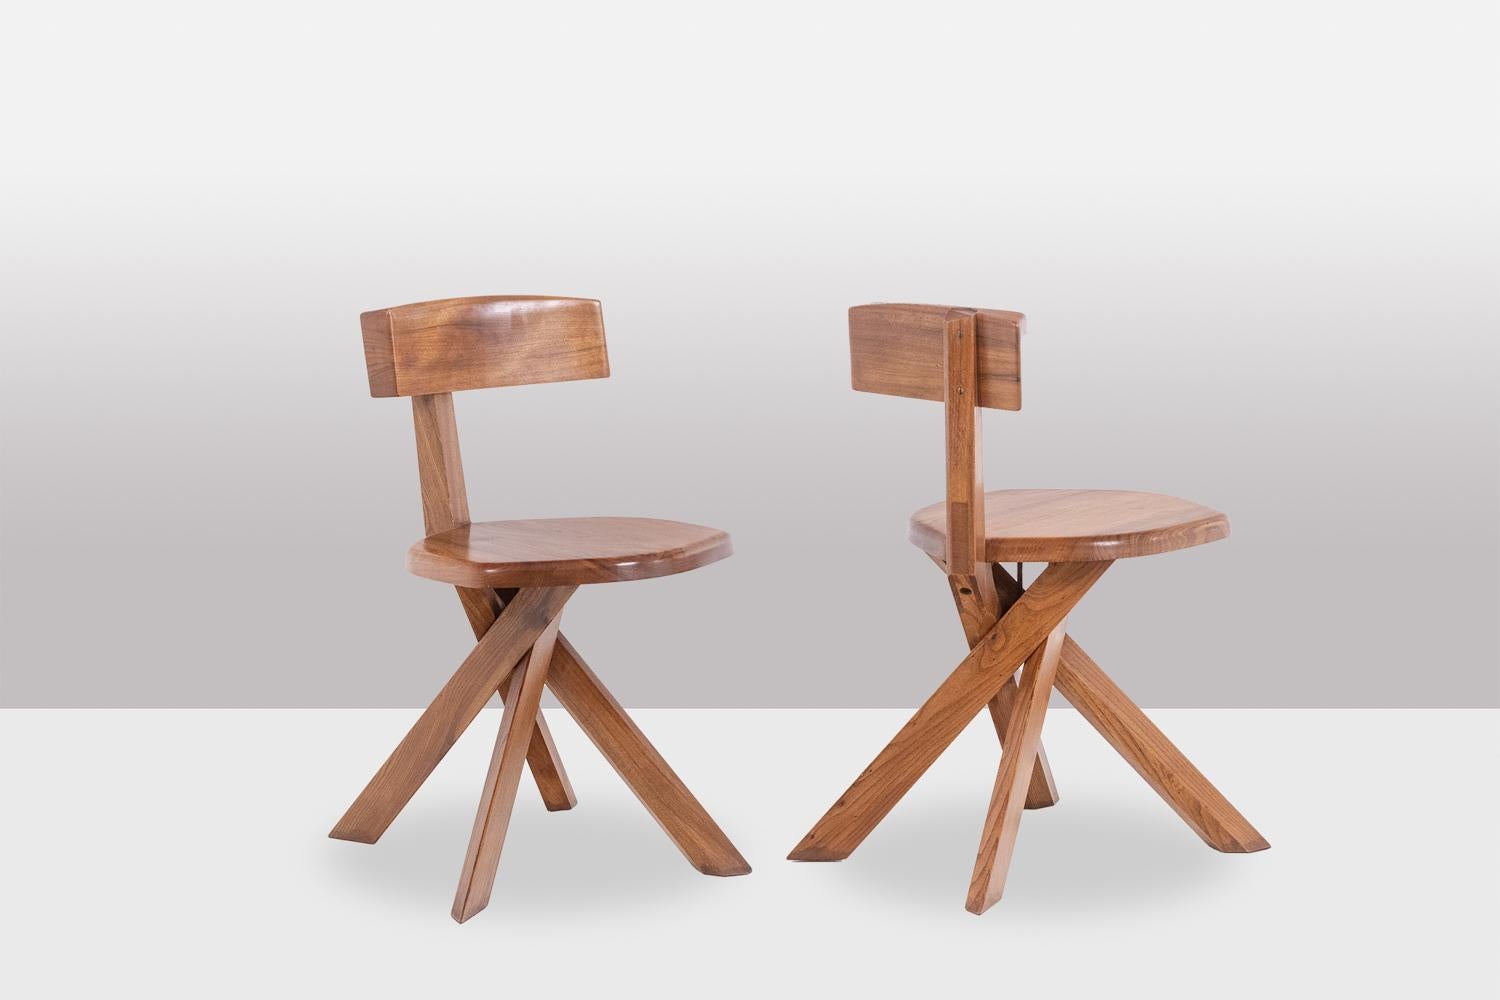 Pierre Chapo, by.

Series of 6 model S34 chairs in solid natural blond elm.

French work realized in the 1960s.

Dimensions: H 71 x W 40 x D 40 cm

Reference: LS58946601E

Pierre Chapo (1927-1987) is a French furniture designer, who fell in love